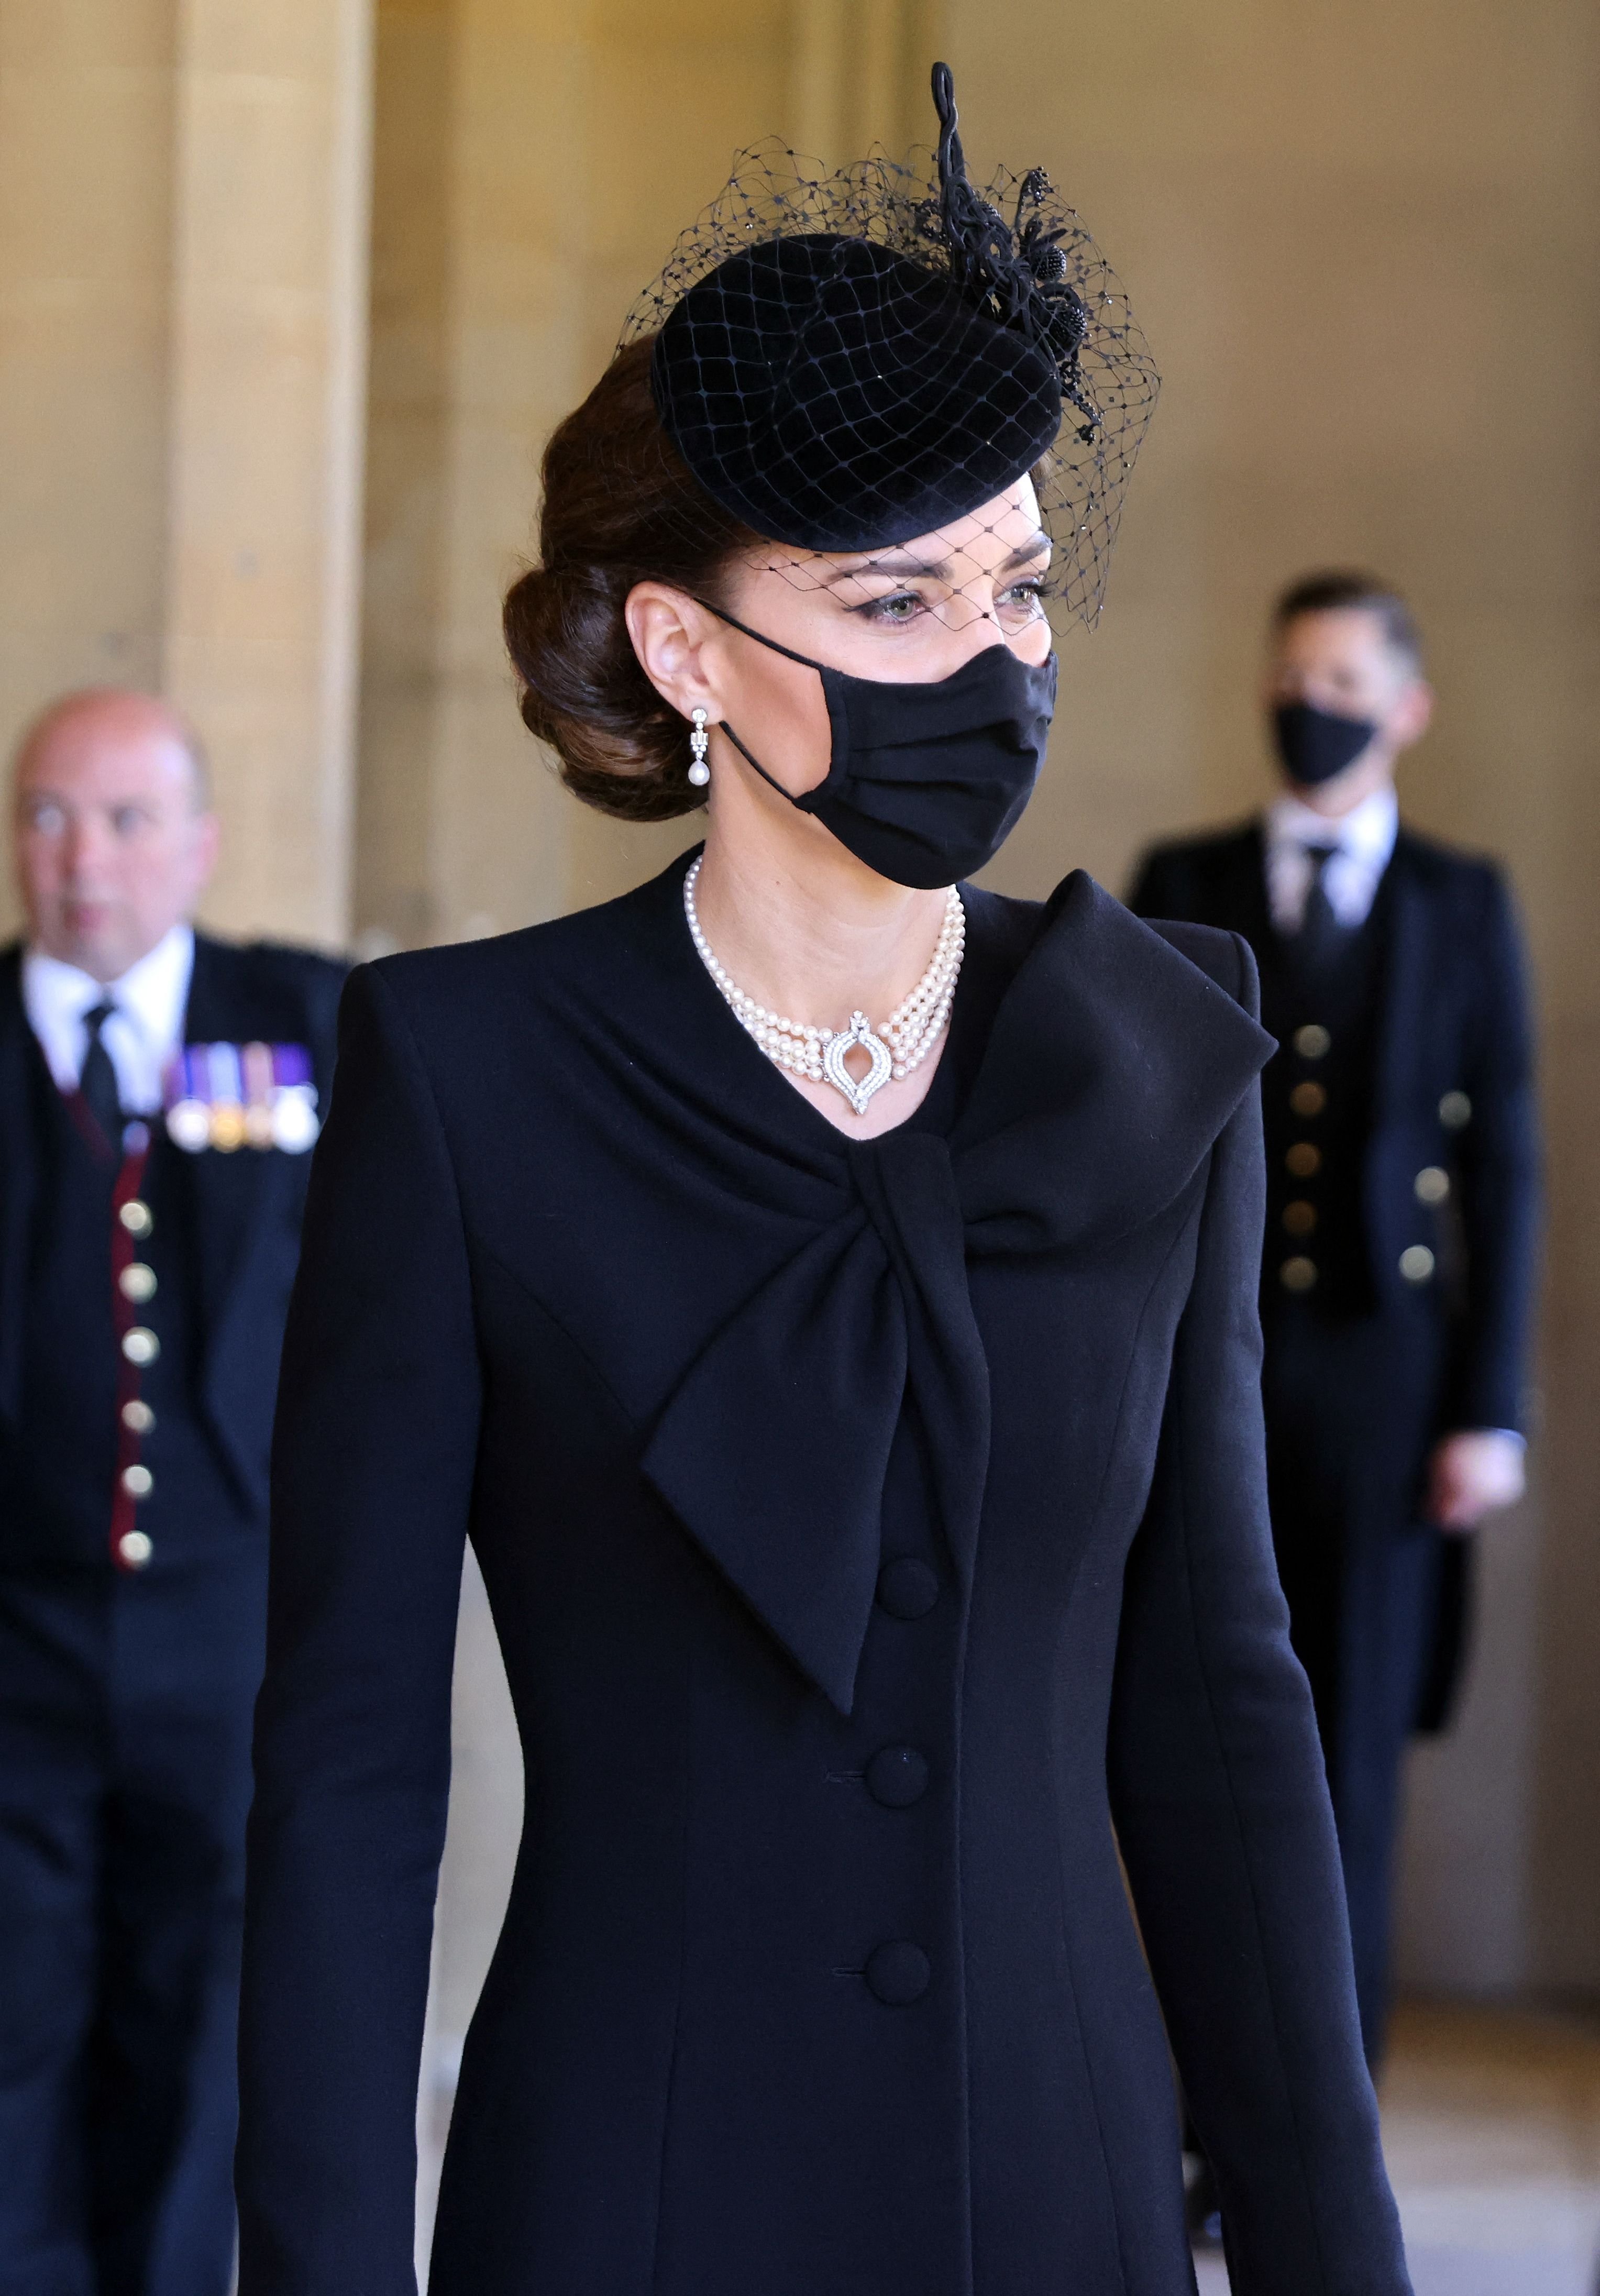 Kate Middleton, Duchess of Cambridge, during the funeral of Prince Philip, Duke of Edinburgh at St George's Chapel in Windsor Castle on April 17, 2021 in Windsor, London. | Source: Getty Images